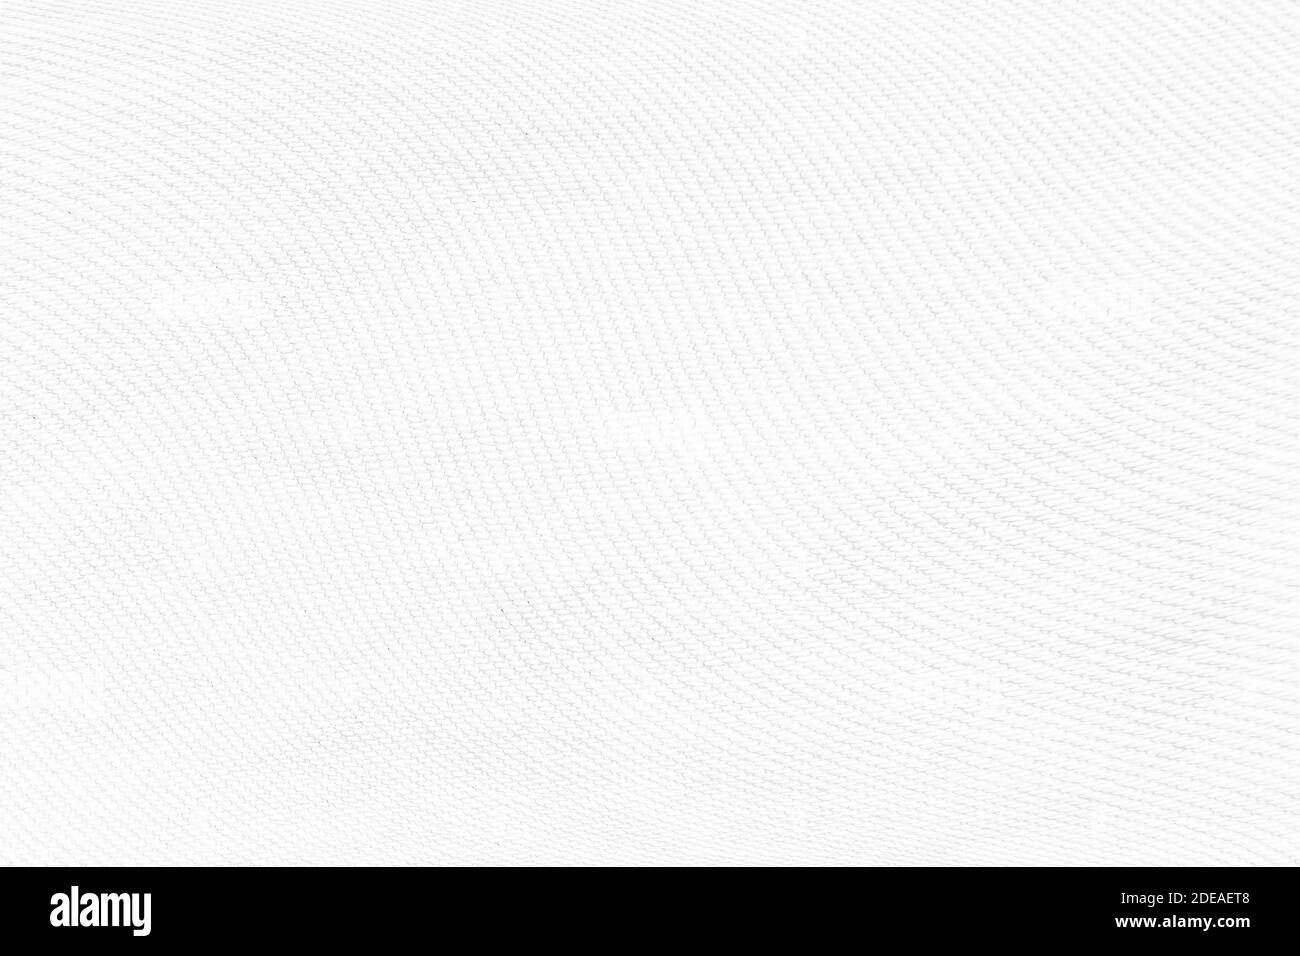 White fabric texture. Abstract cloth background. Stock Photo